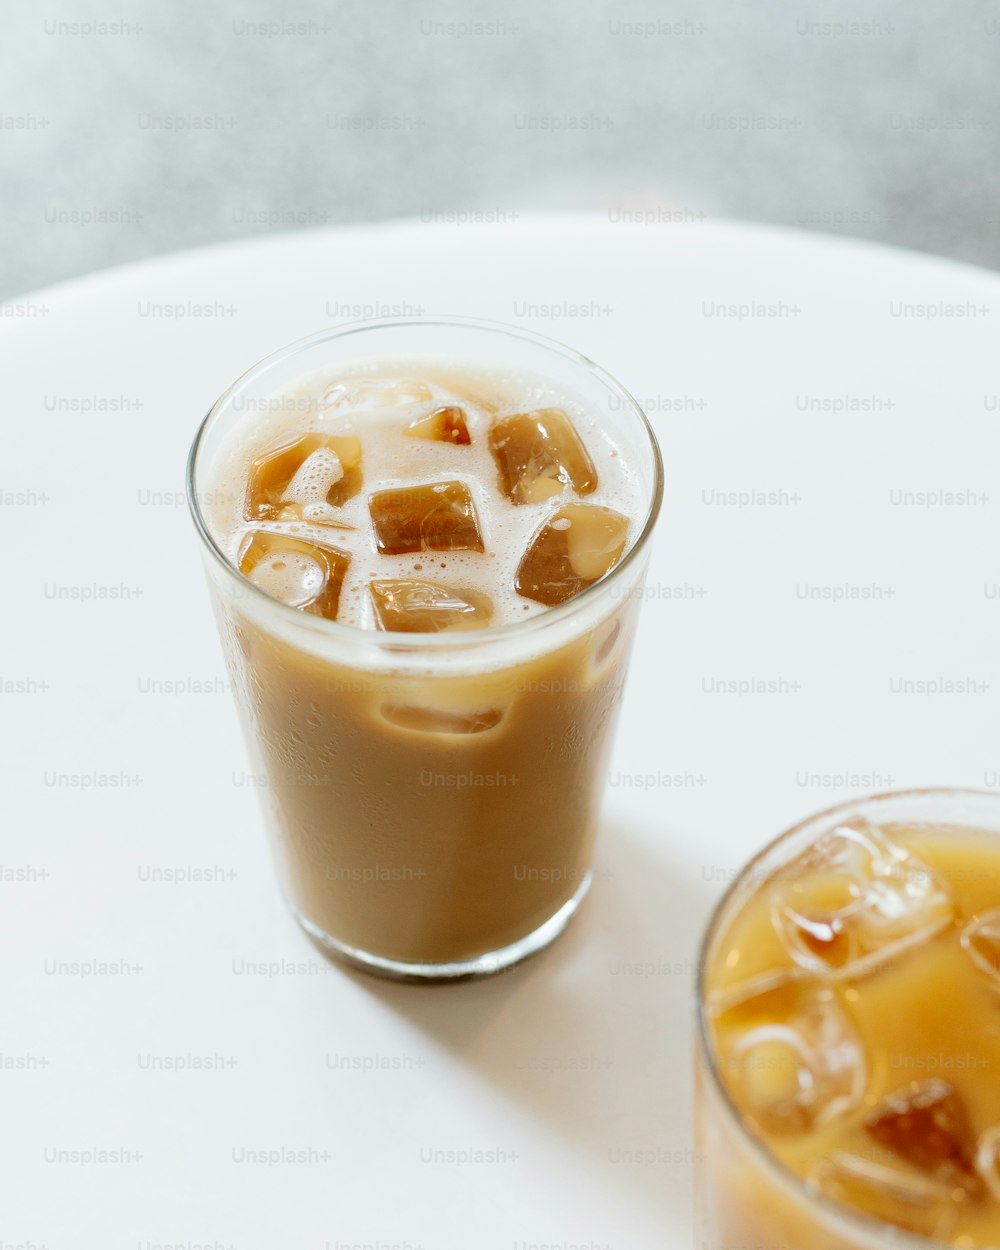 a glass of iced coffee next to a glass of iced coffee